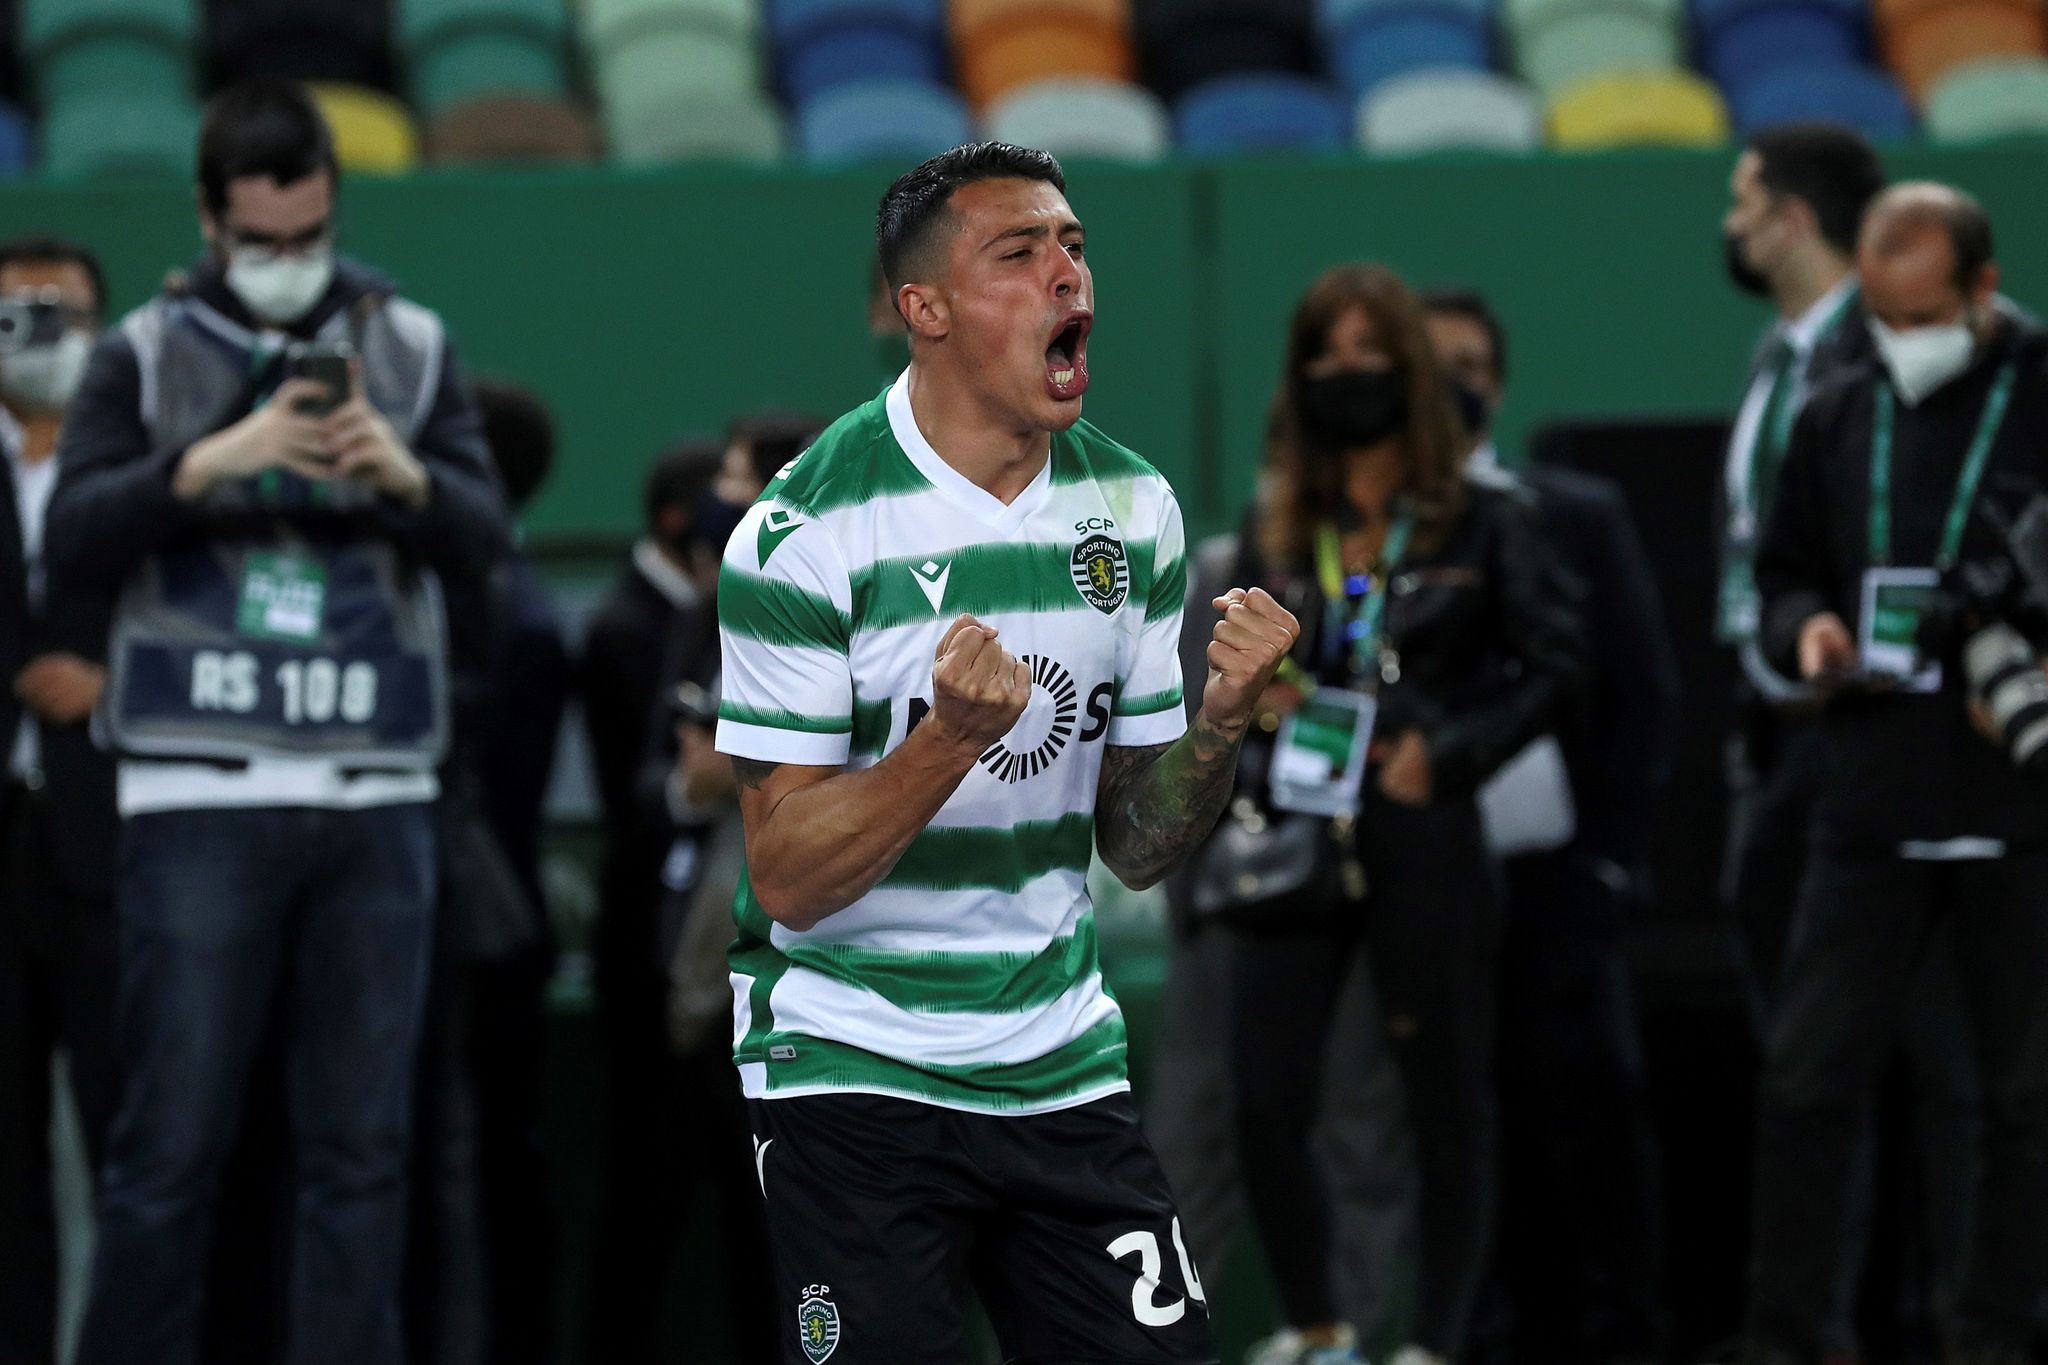 Pedro Porro celebrates after Sporting were confirmed as Liga NOS champions.